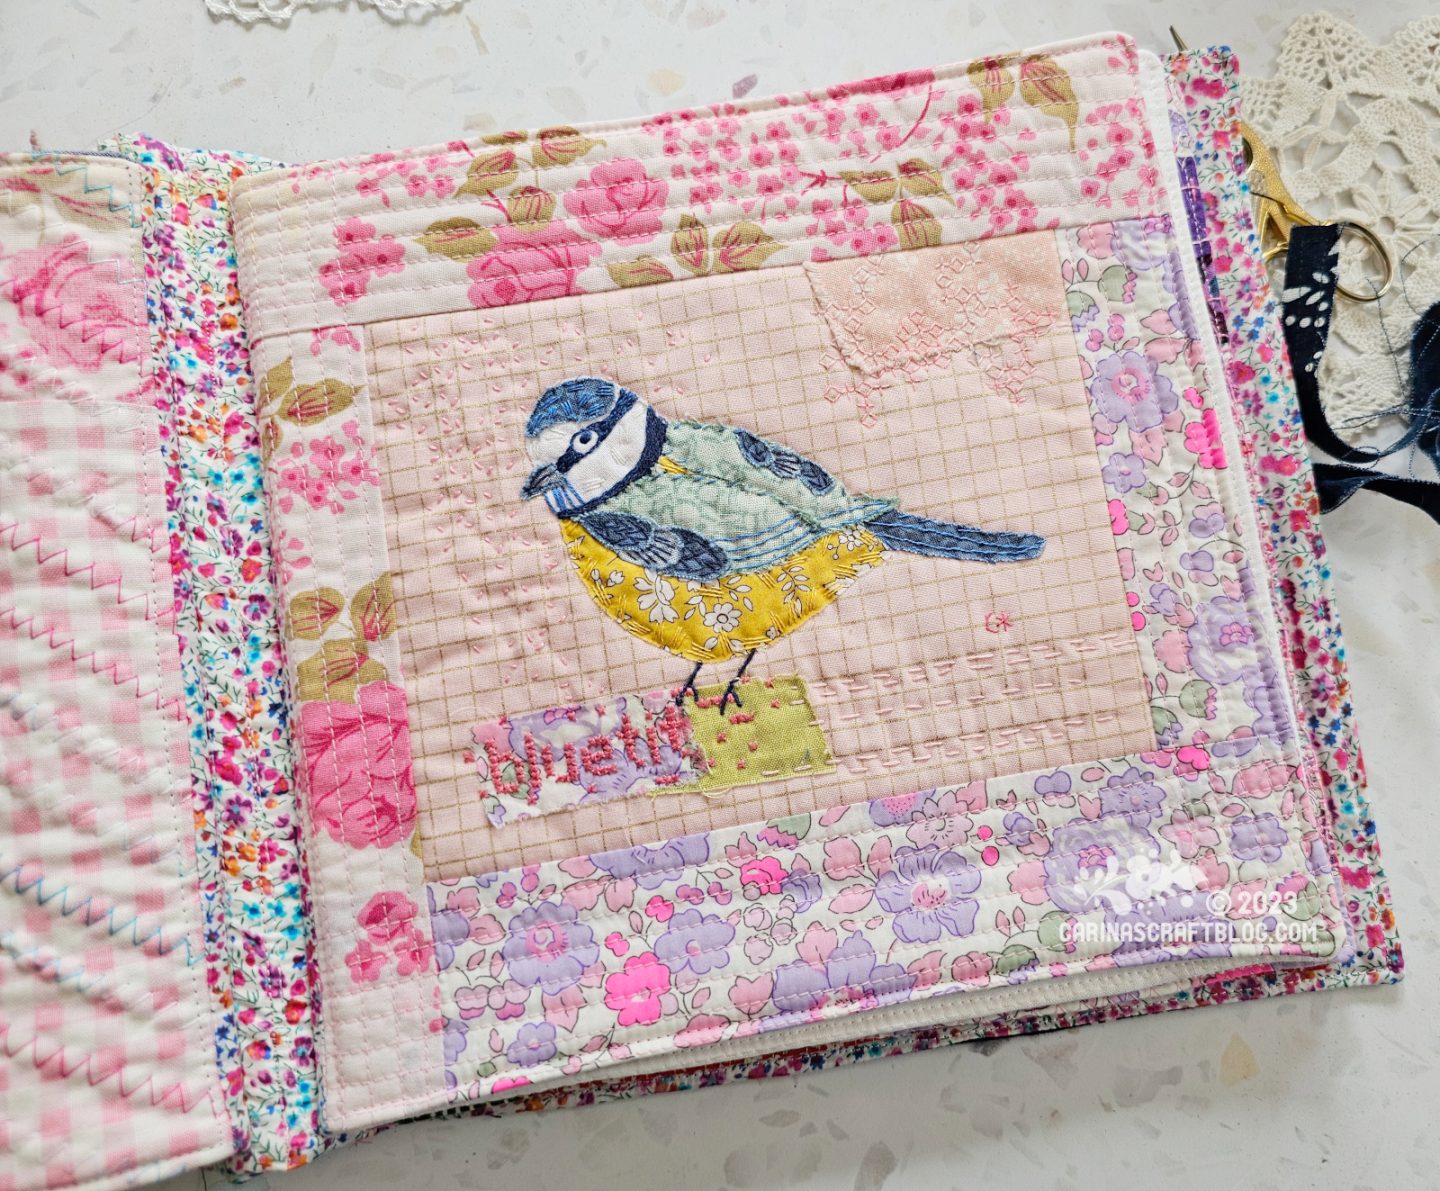 Overhead view of a page in a textile book. The background is pale pinks and lilac. In the centre is an appliqué and hand embroidery blue tit.